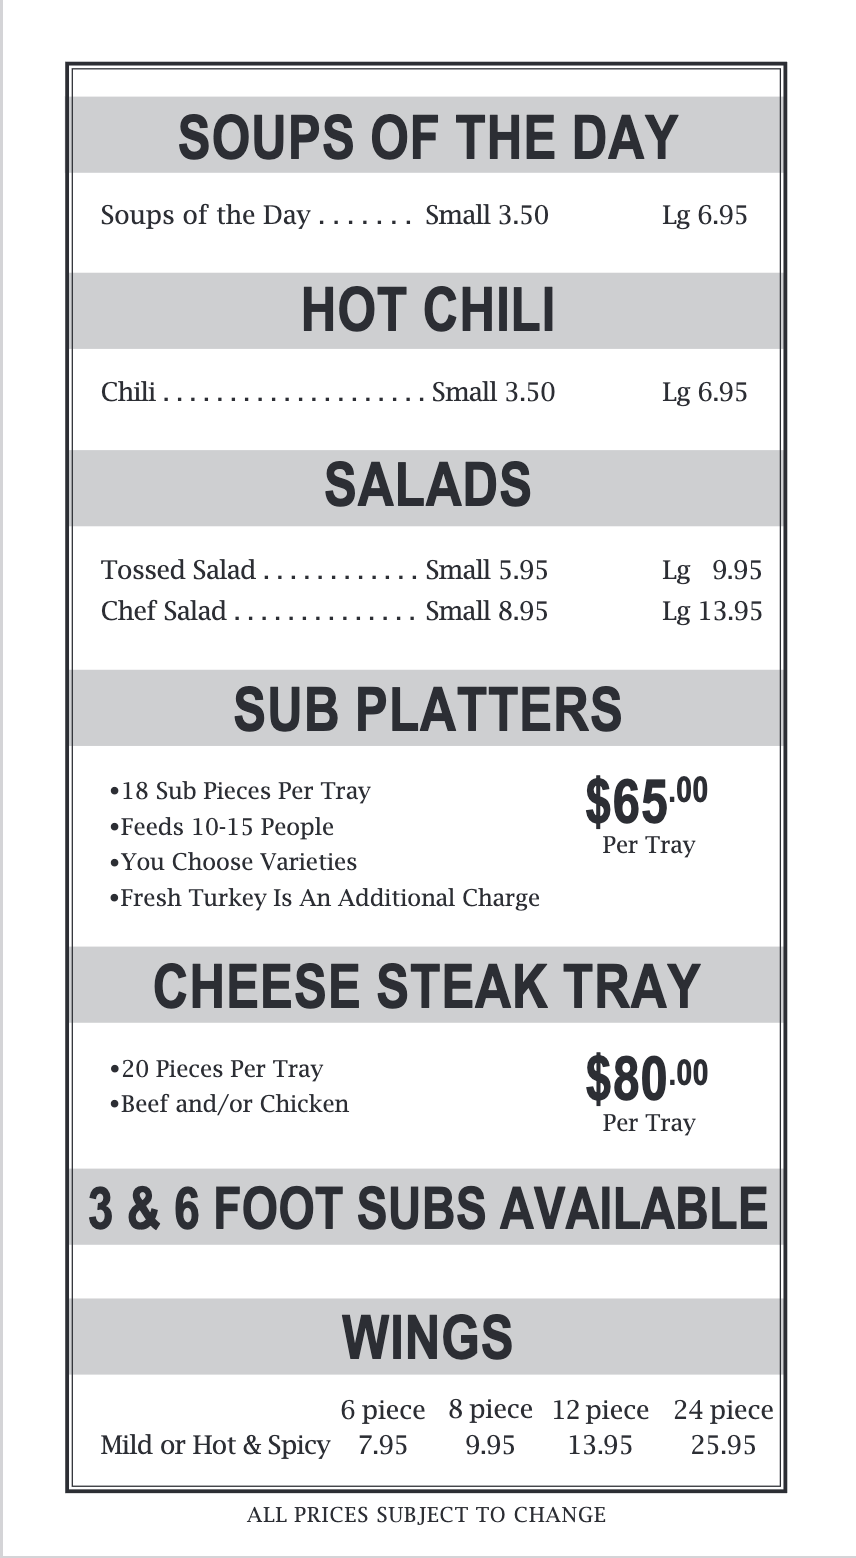 Soup, Chili, Salads, Sub Platters, Cheese Steak Tray, 3 & 6 foot subs and Wings Menus